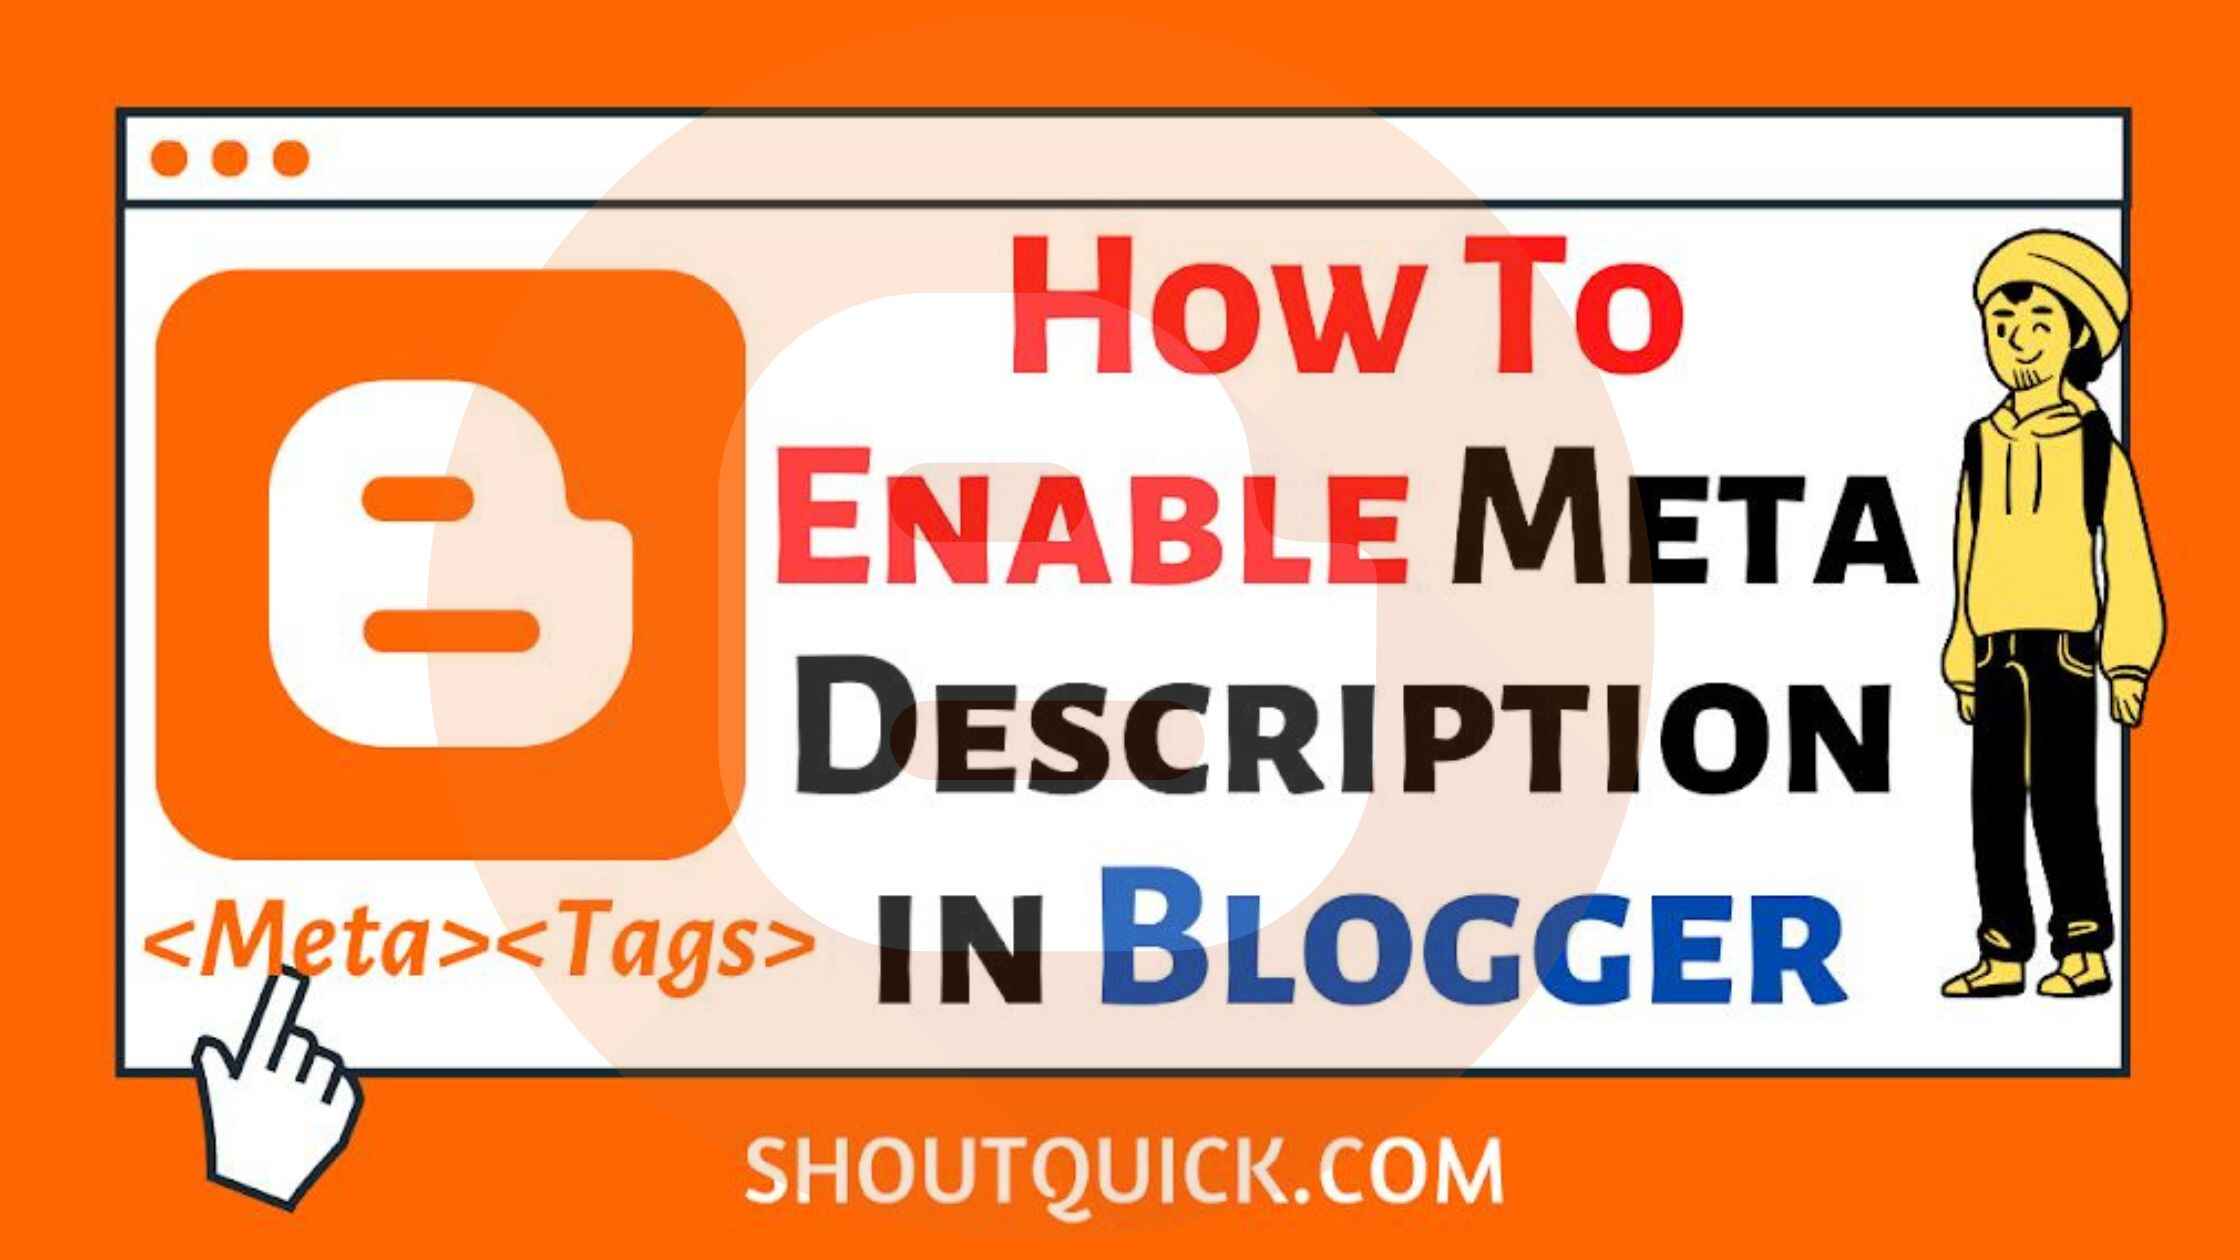 How to enable Meta Description in Blogger